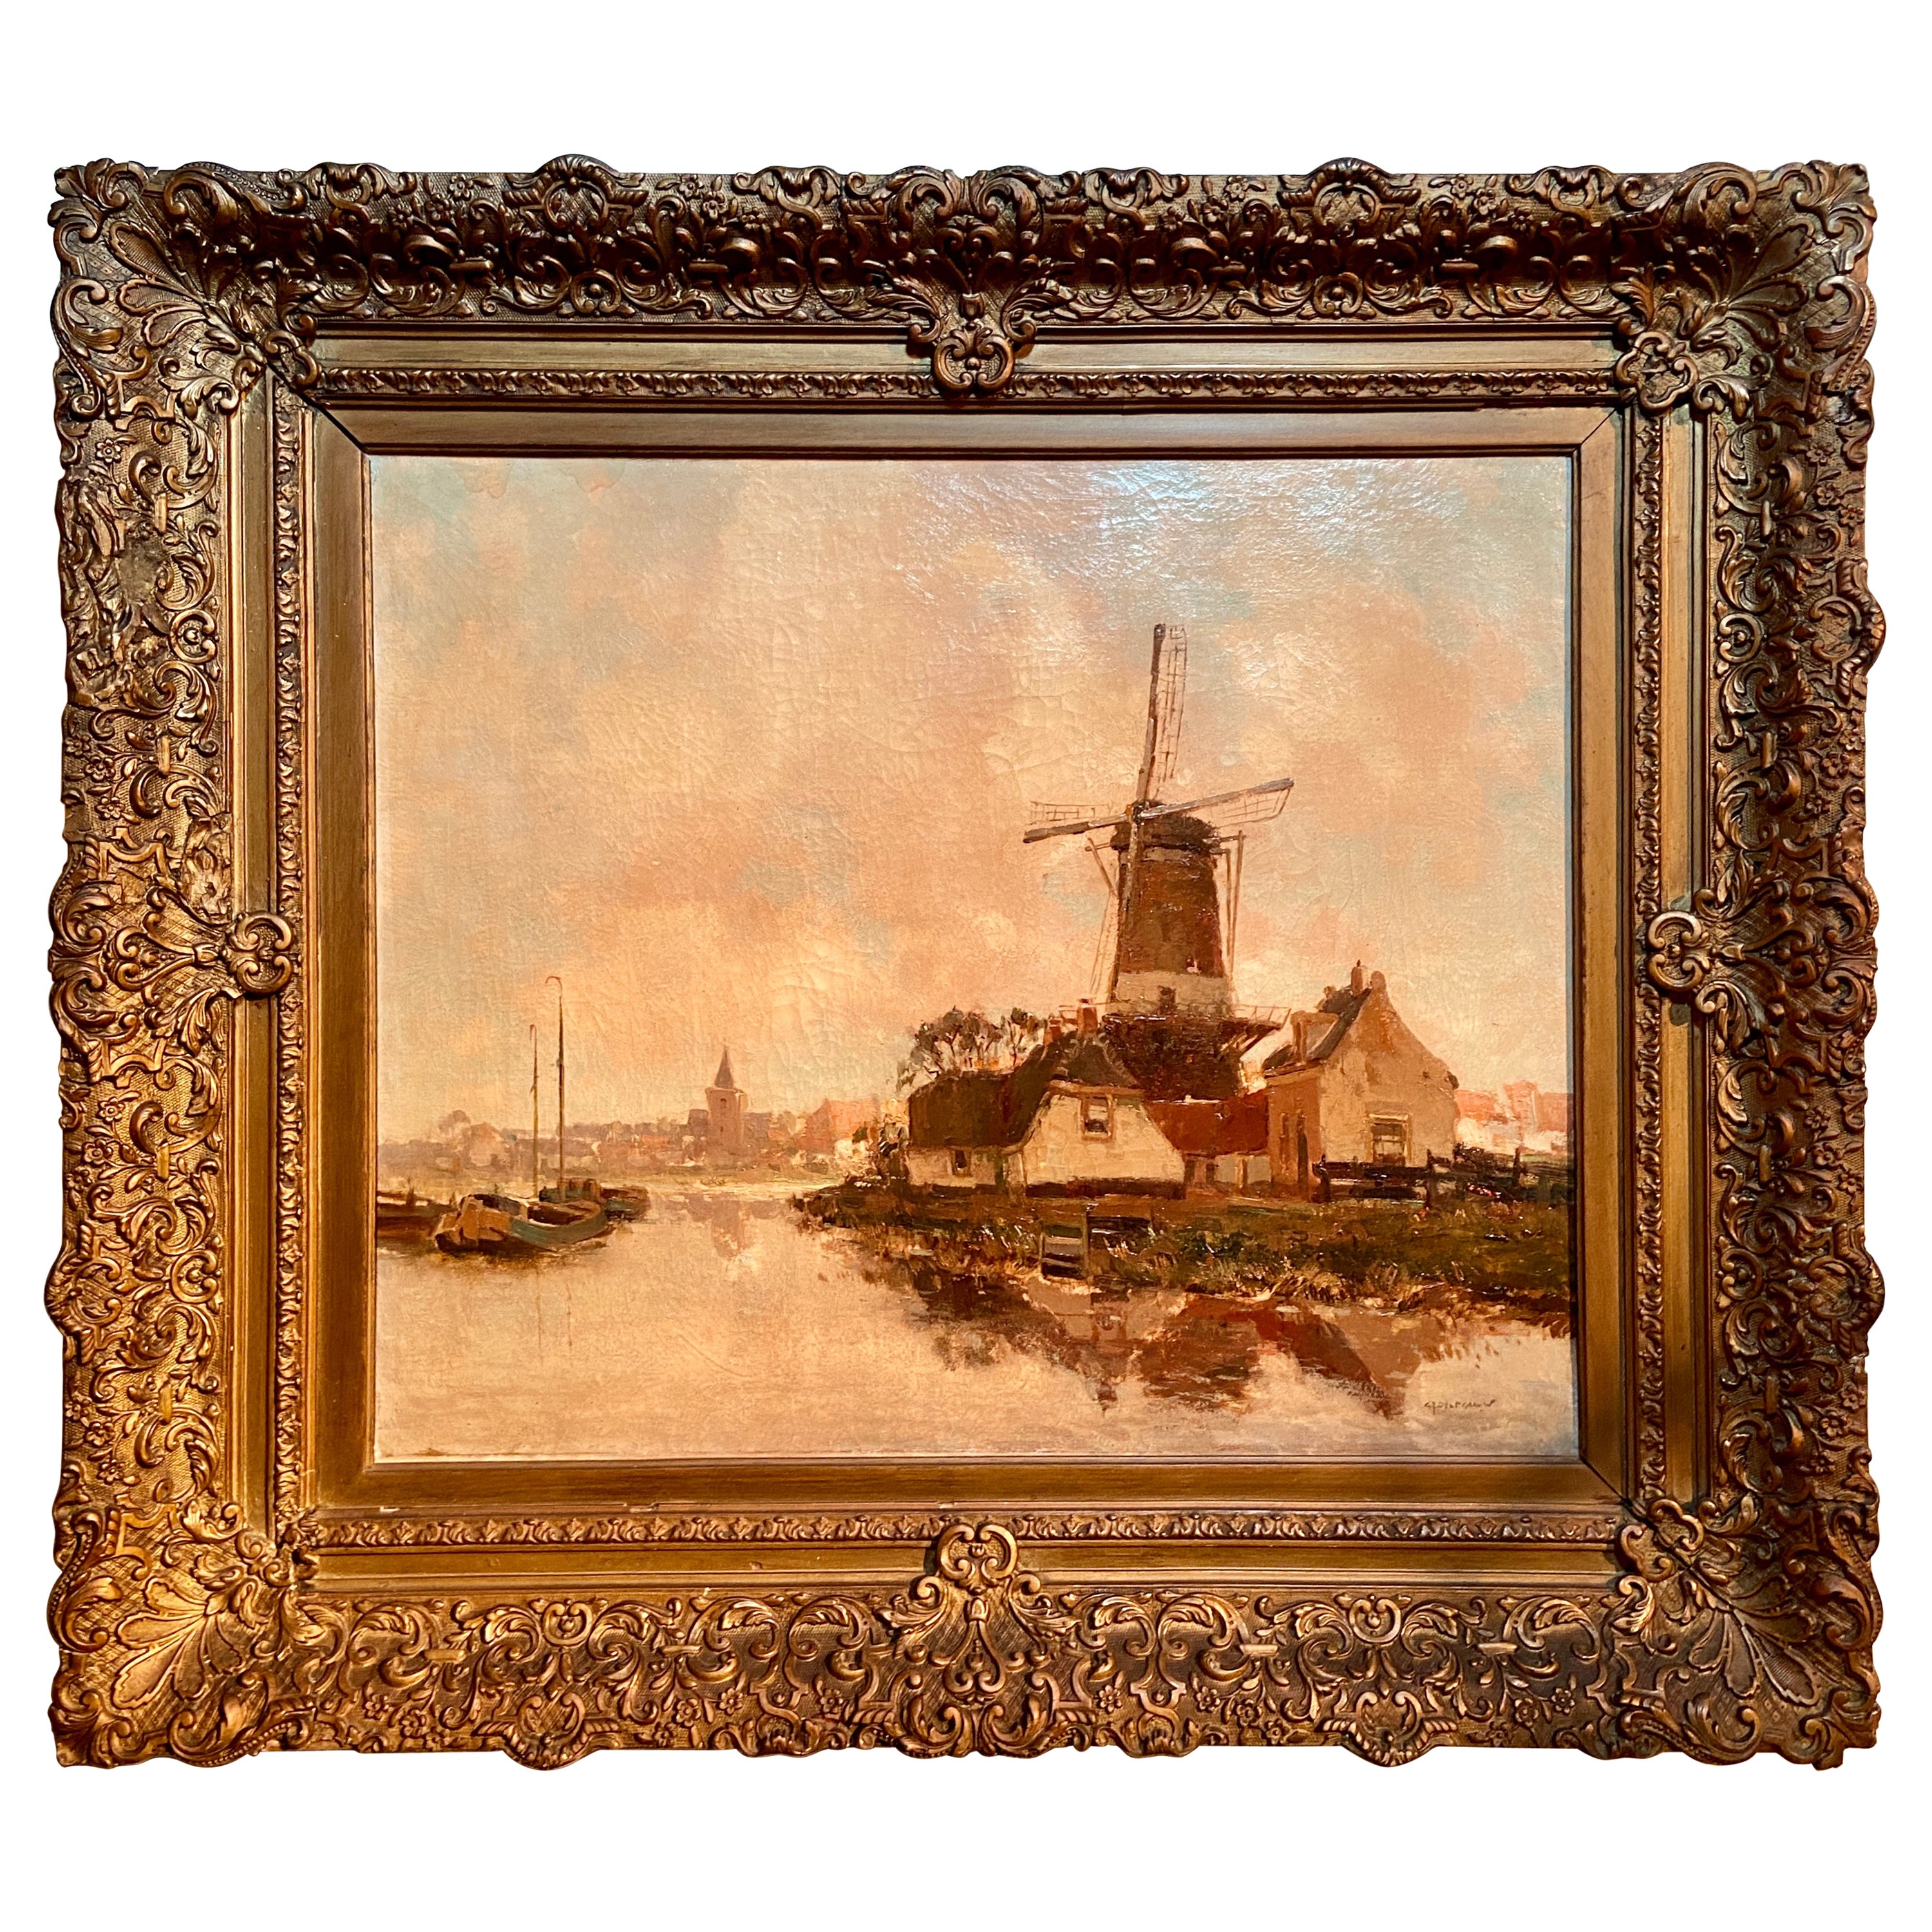 Antique 19th Century Dutch Oil Painting of Windmill Signed "G. J. Delfgauw" For Sale